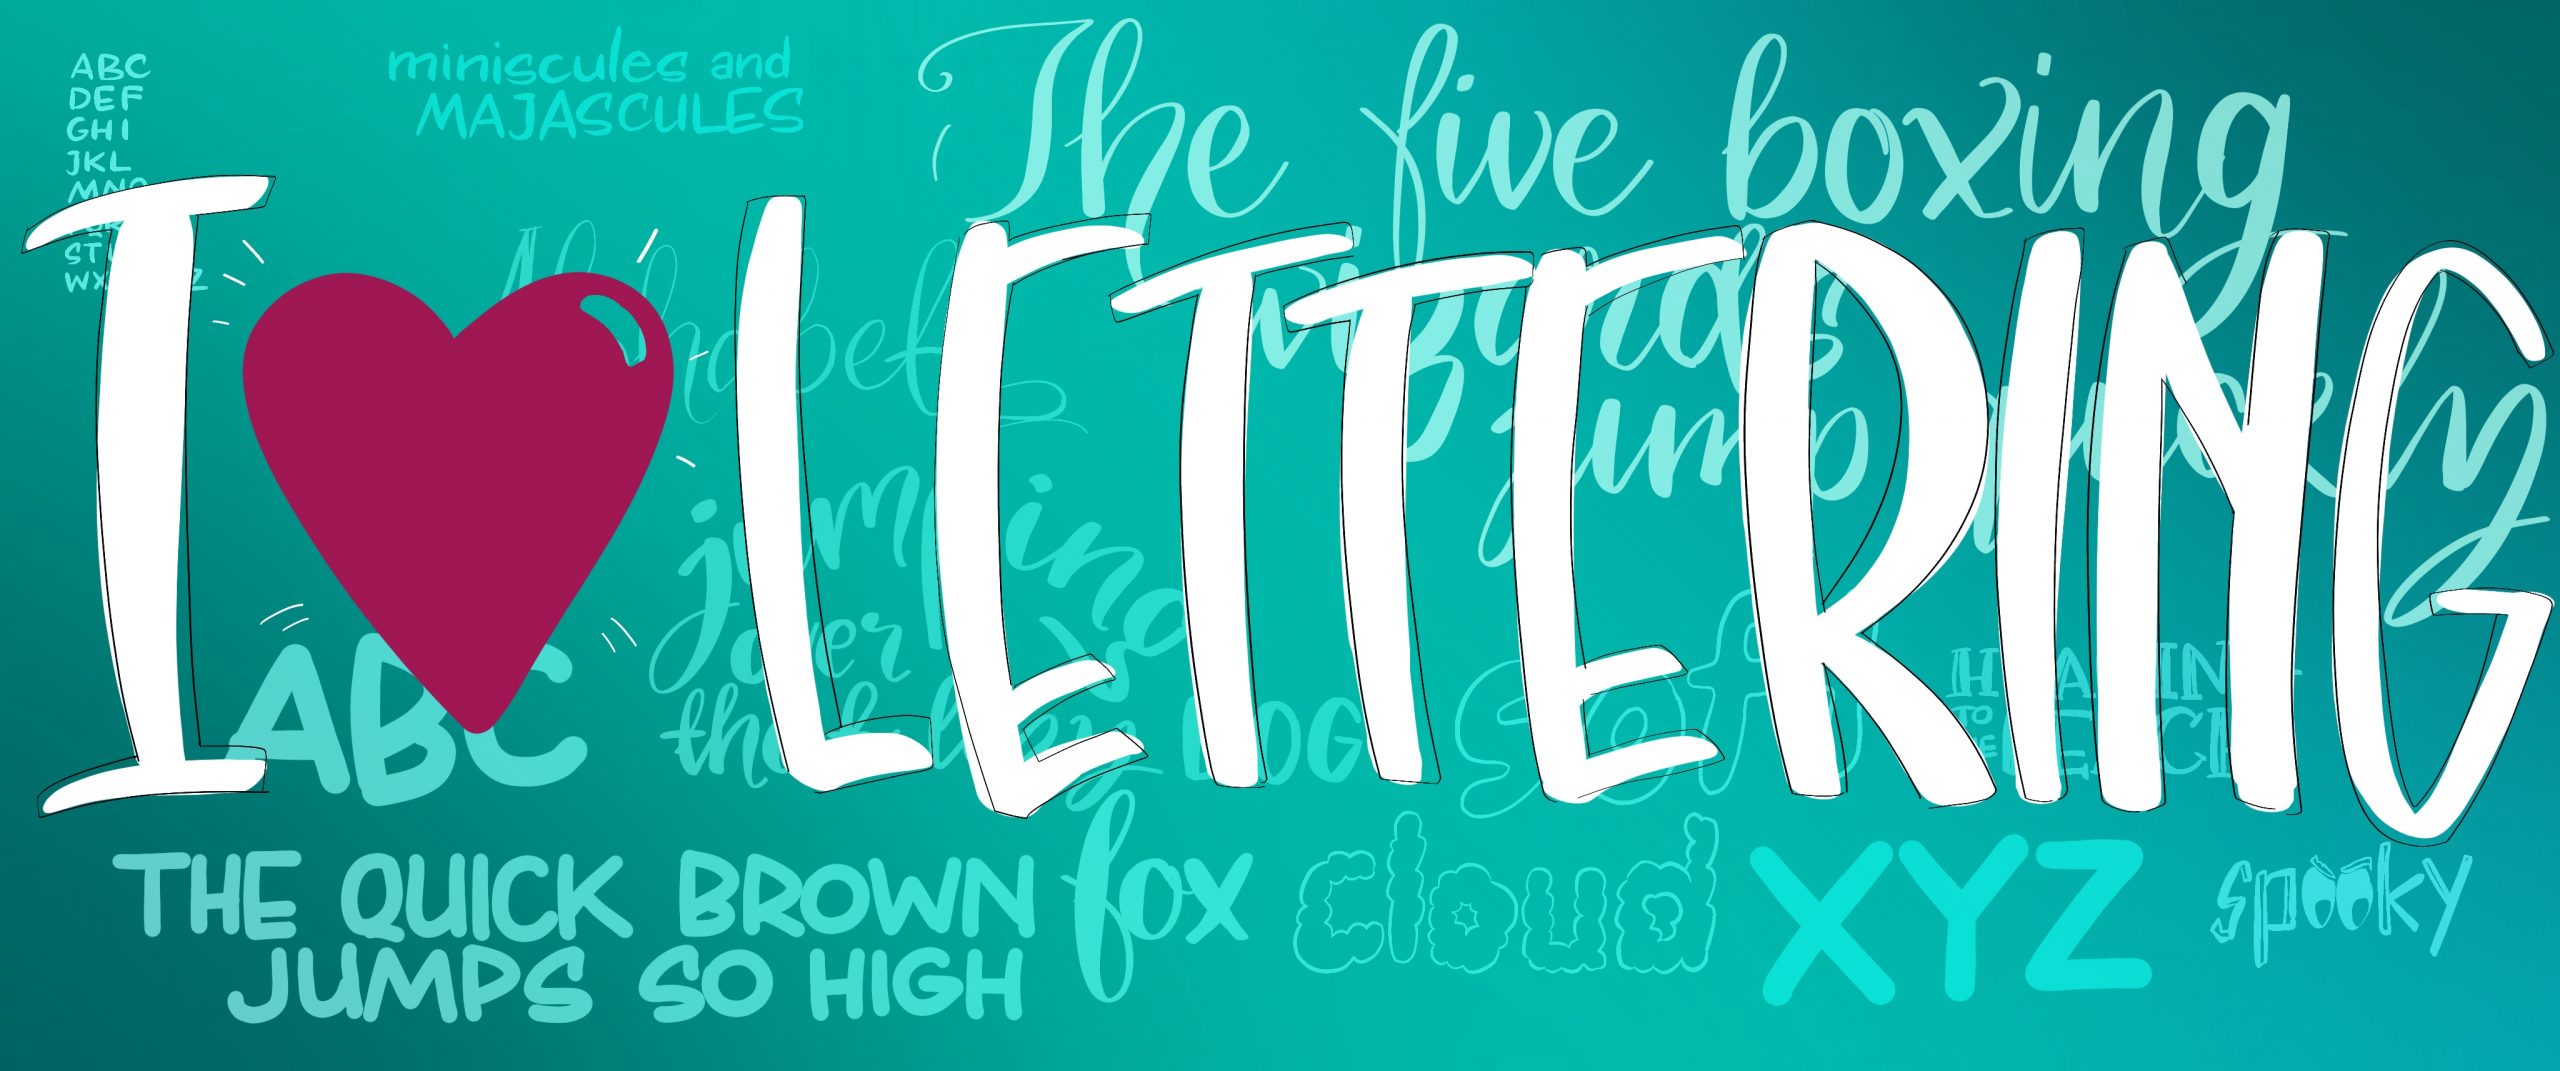 Image header that says I love lettering and has different lettering styles in the background